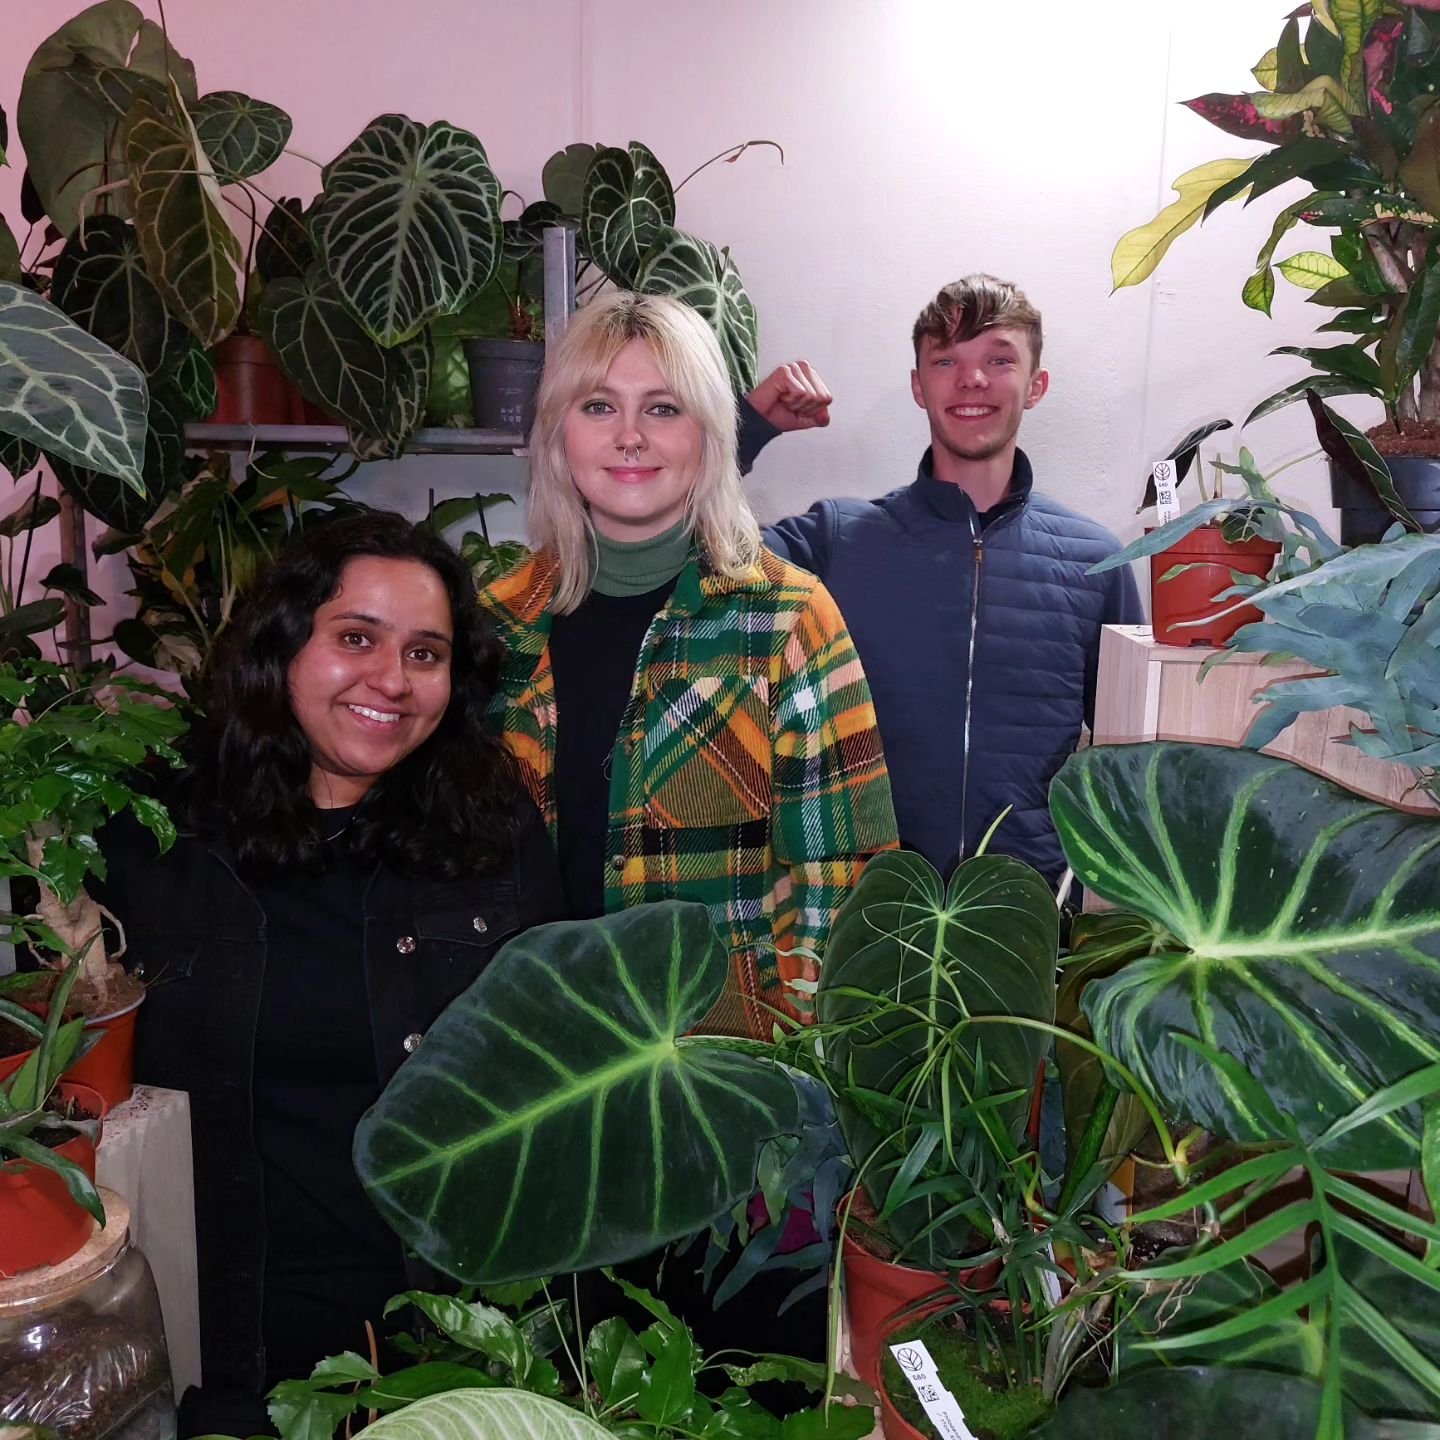 Loved seeing fellow YPHA members at the @the_rhs #rhsurbanshow in Manchester last weekend! Joining our discord channels lets our members connect with others easily and attend events together 🌿. If you're someone who likes going to shows but doesn't 